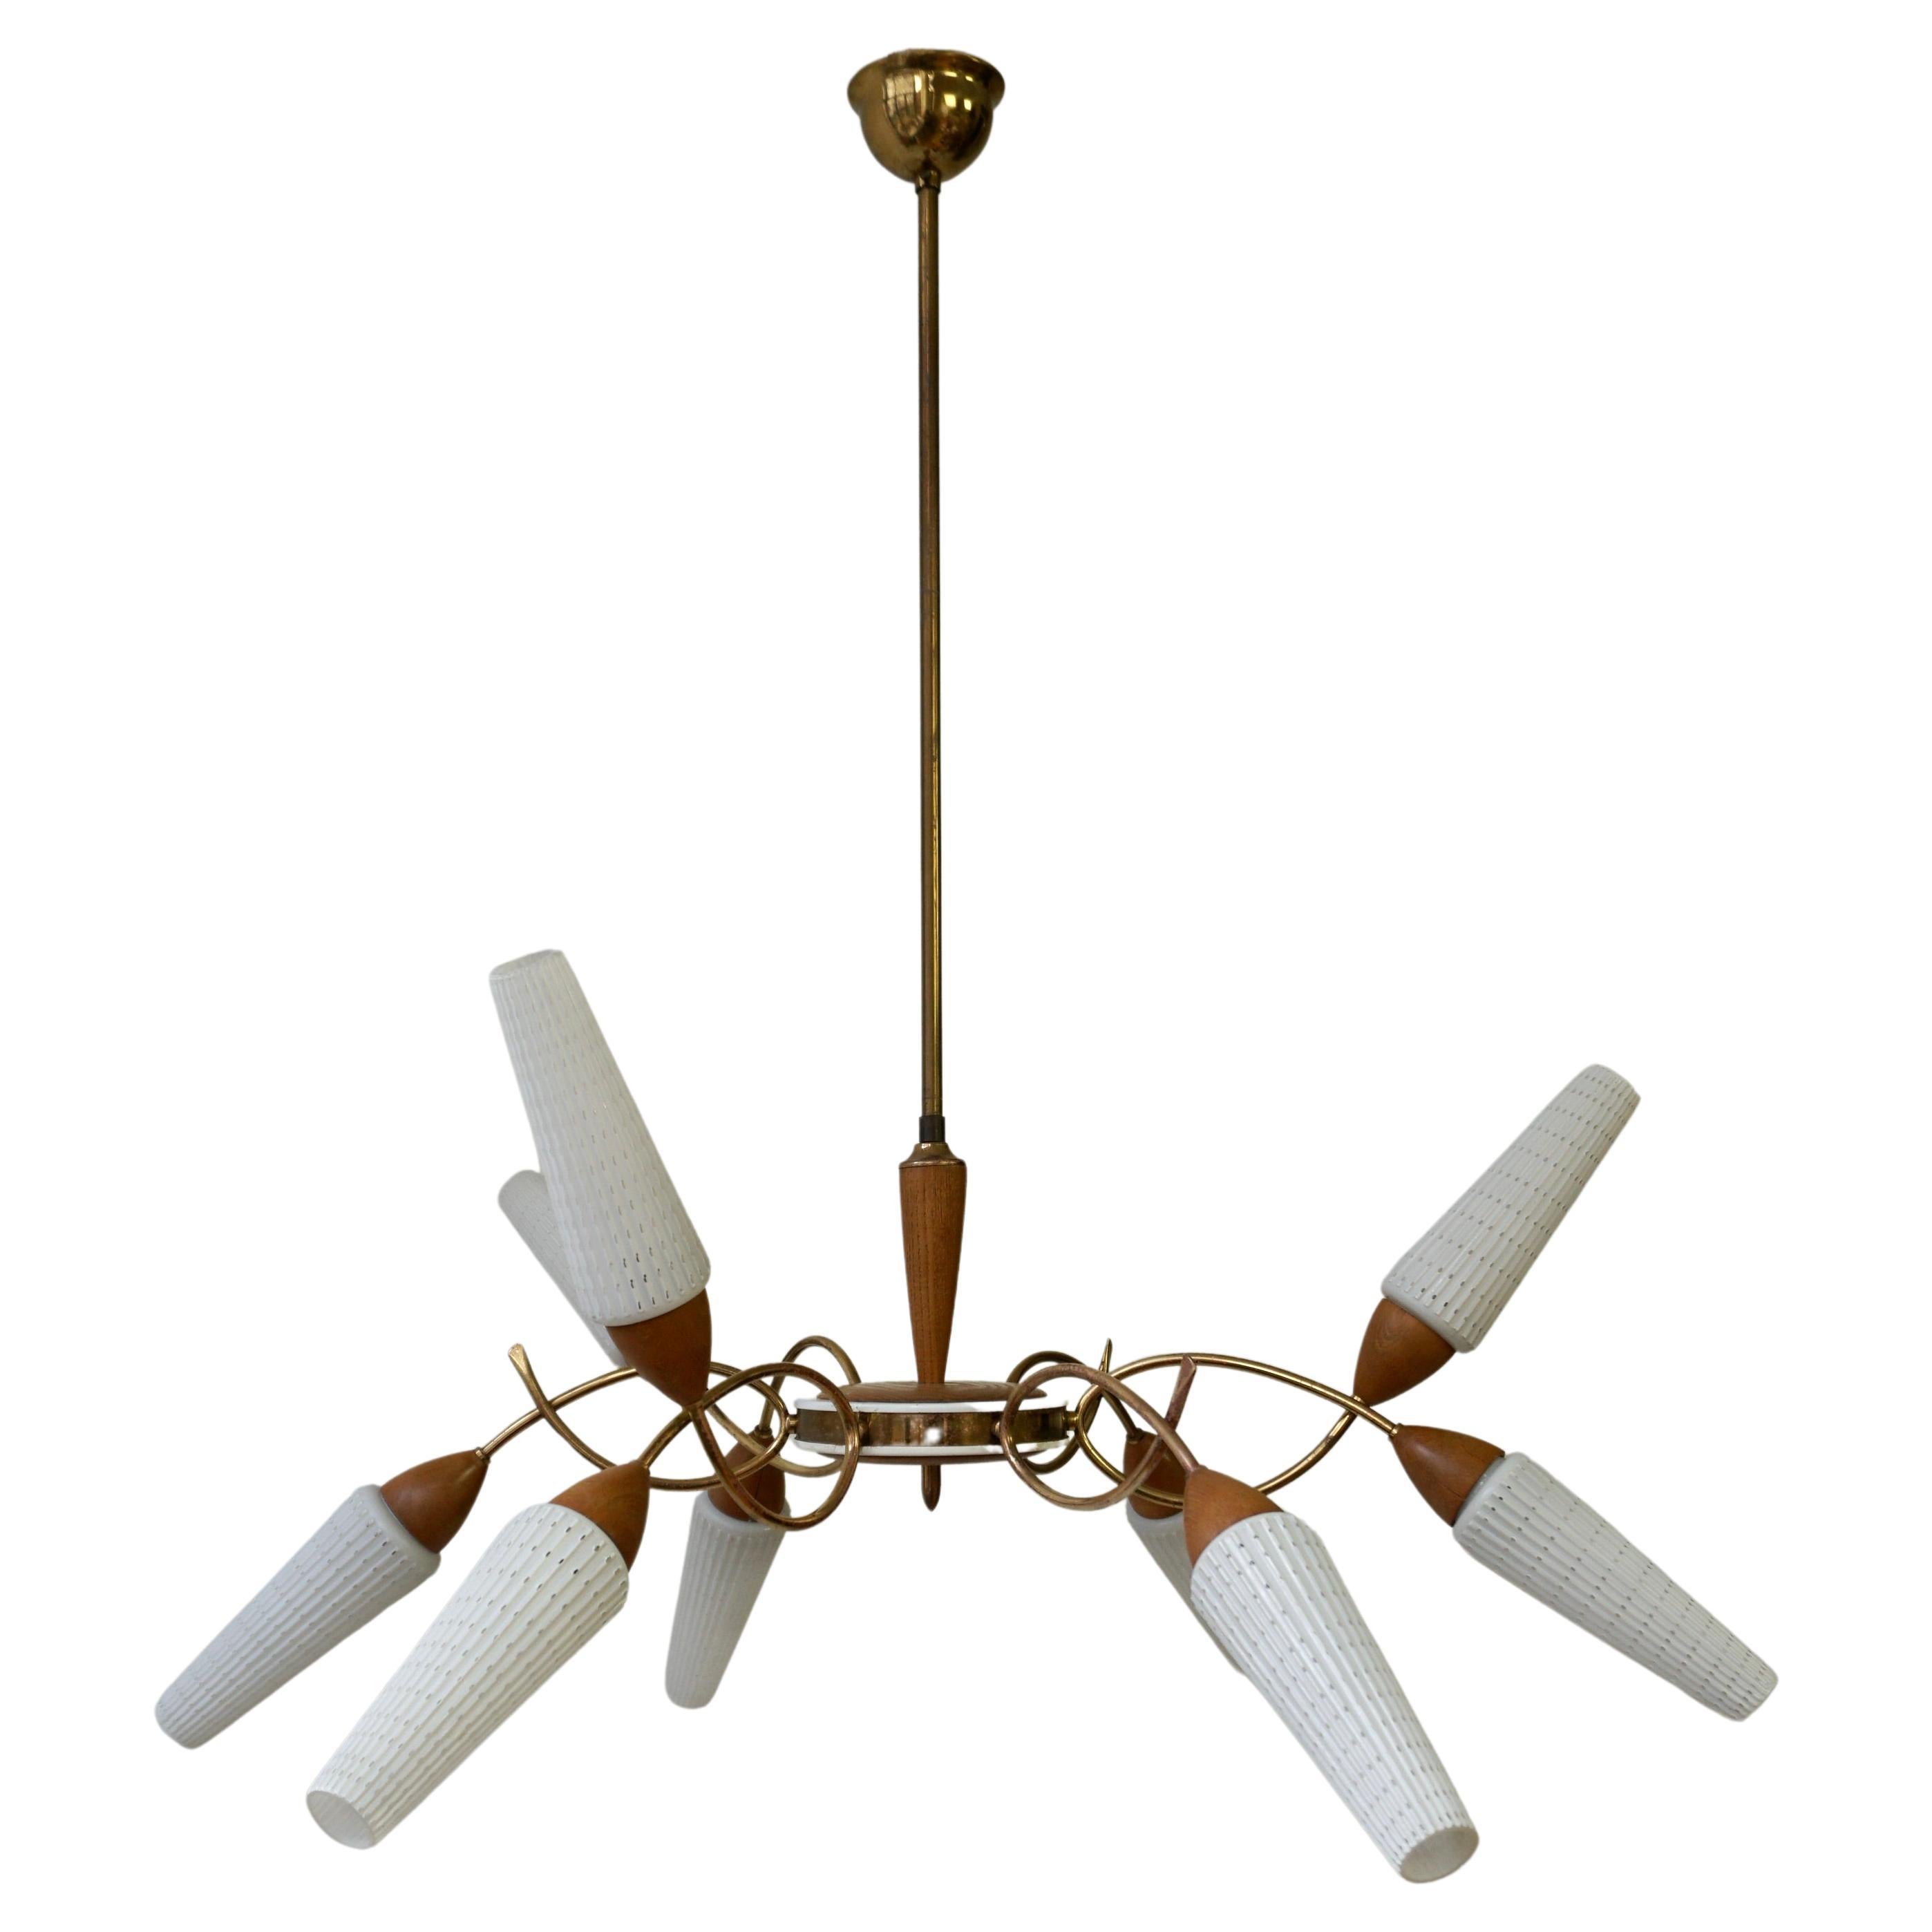 This exceptional 1950s Mid-Century modernist spider nine-light Italian sputnik chandelier pendant lamp is made out of a brass and wooden frame and opaline glass tulip shades.  
Made in Italy, circa 1950.

The lamp has nine sockets for small